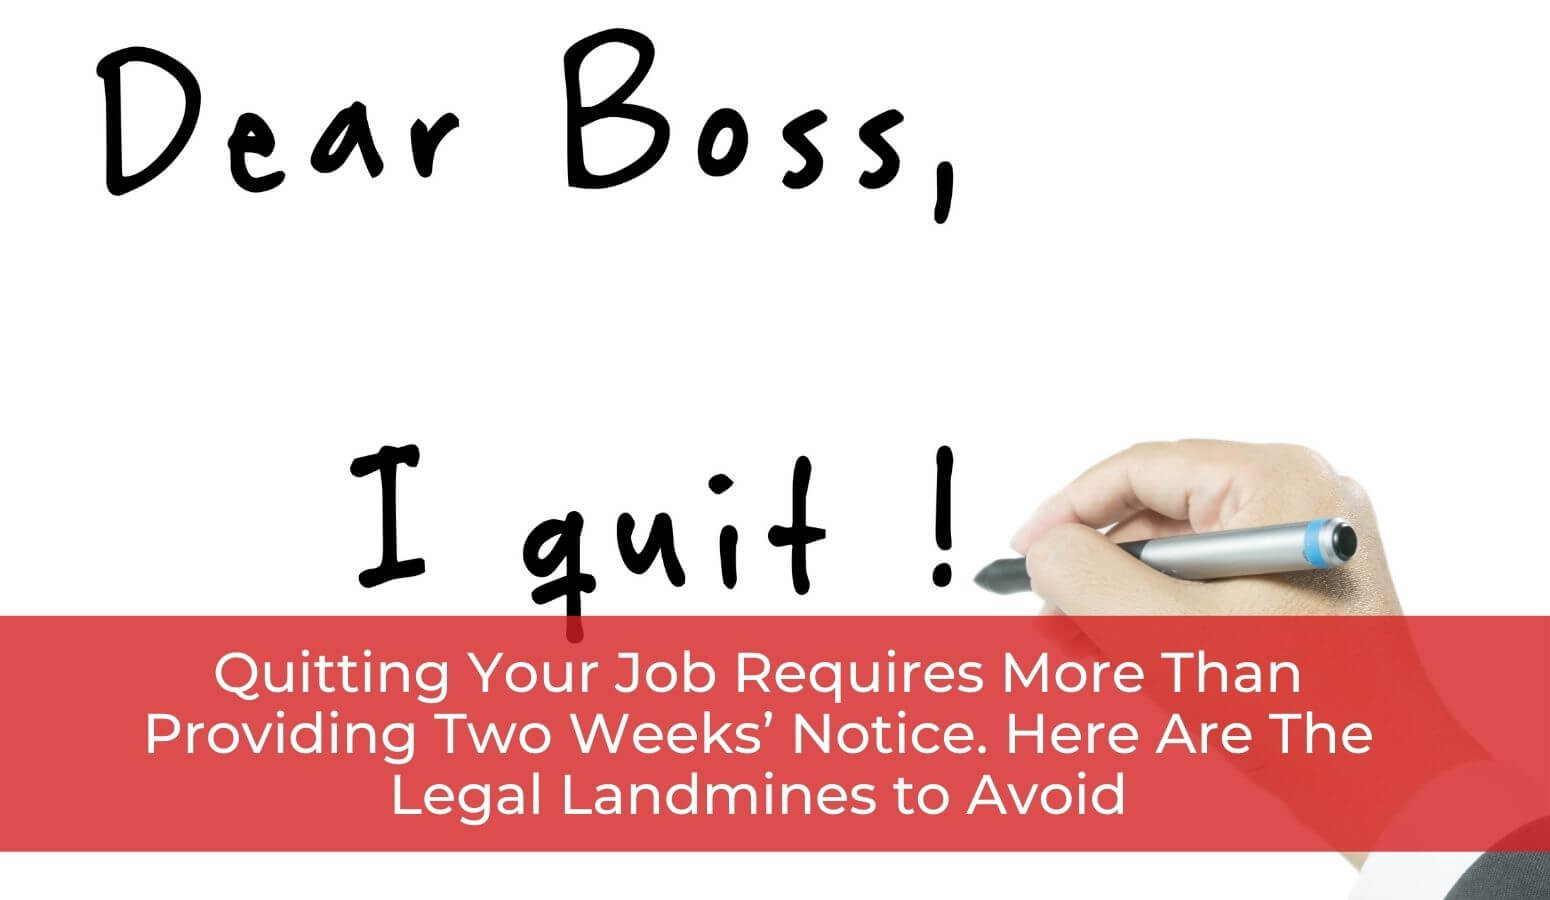 Featured image for “Quitting your job requires more than providing two weeks’ notice. Here are the legal landmines to avoid”